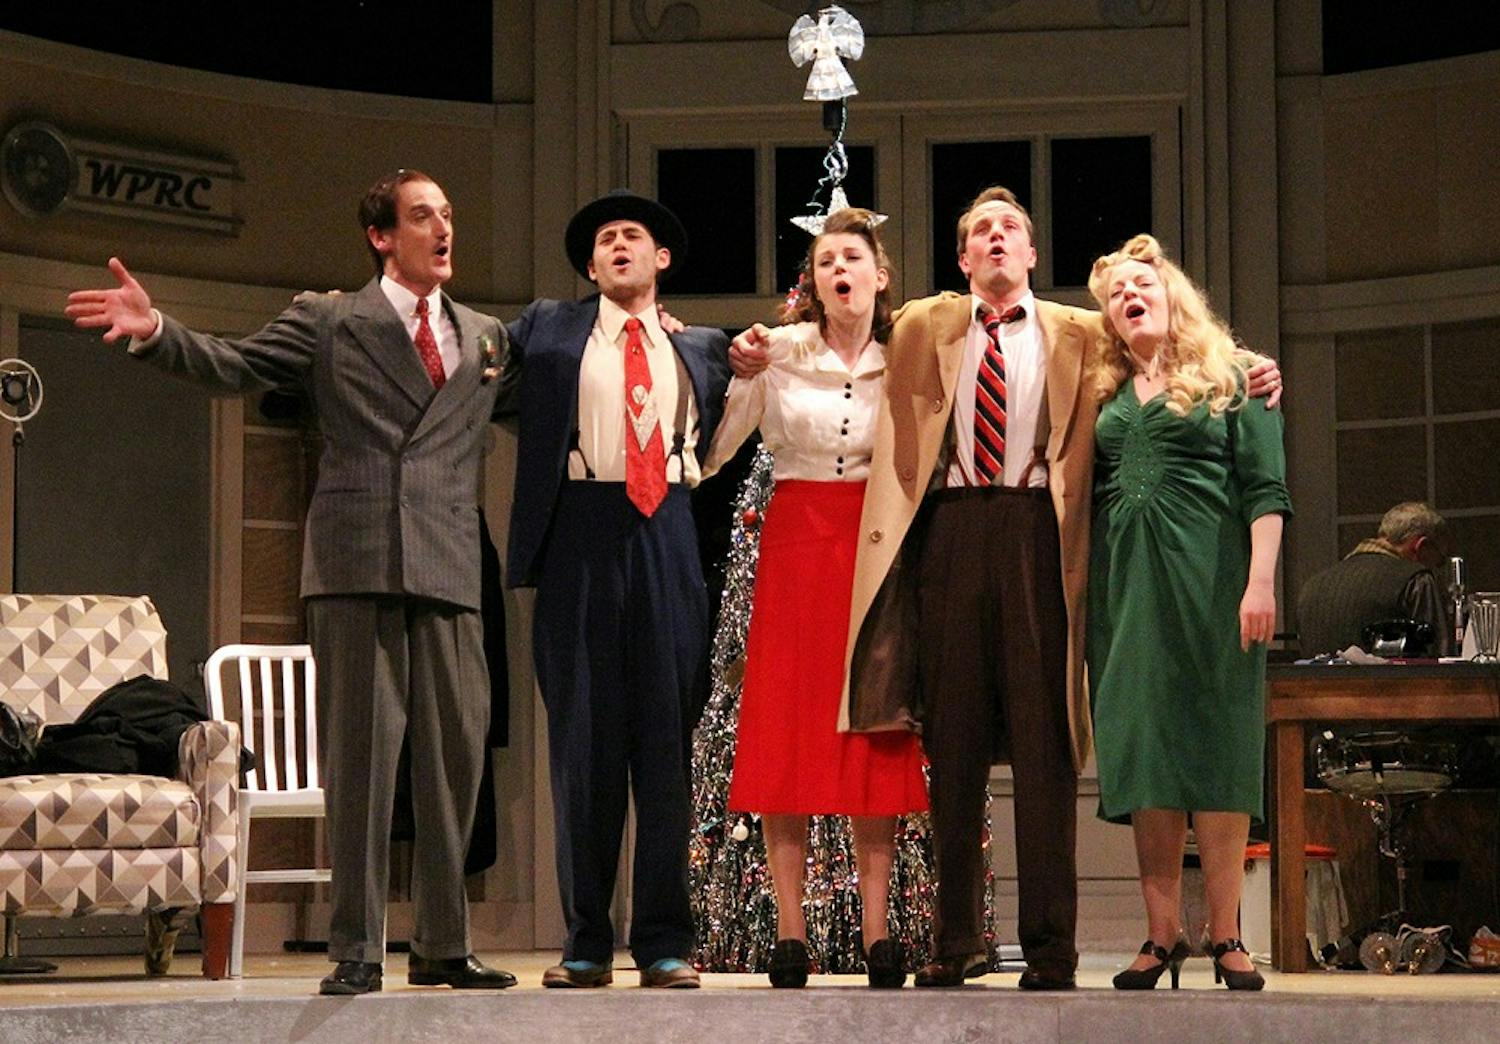 	The cast of “It’s a Wonderful Life: A Live Radio Play” closes the Tuesday dress rehearsal performance by singing the ballad “Auld Lang Syne.”